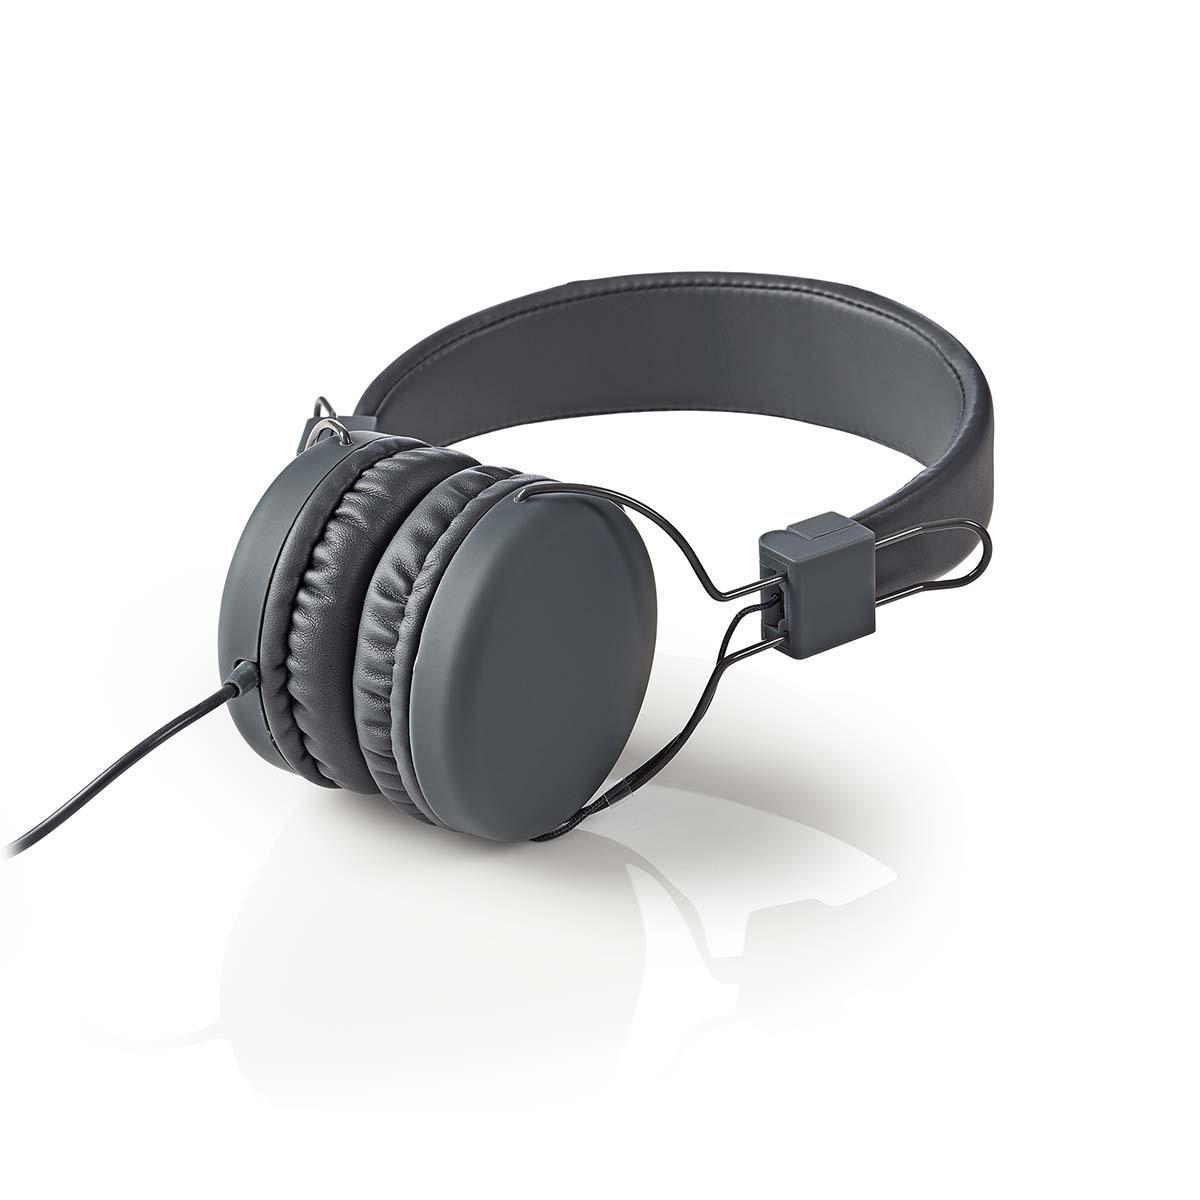 HPWD1100GY  AURICULARES PLEGABLES GRIS